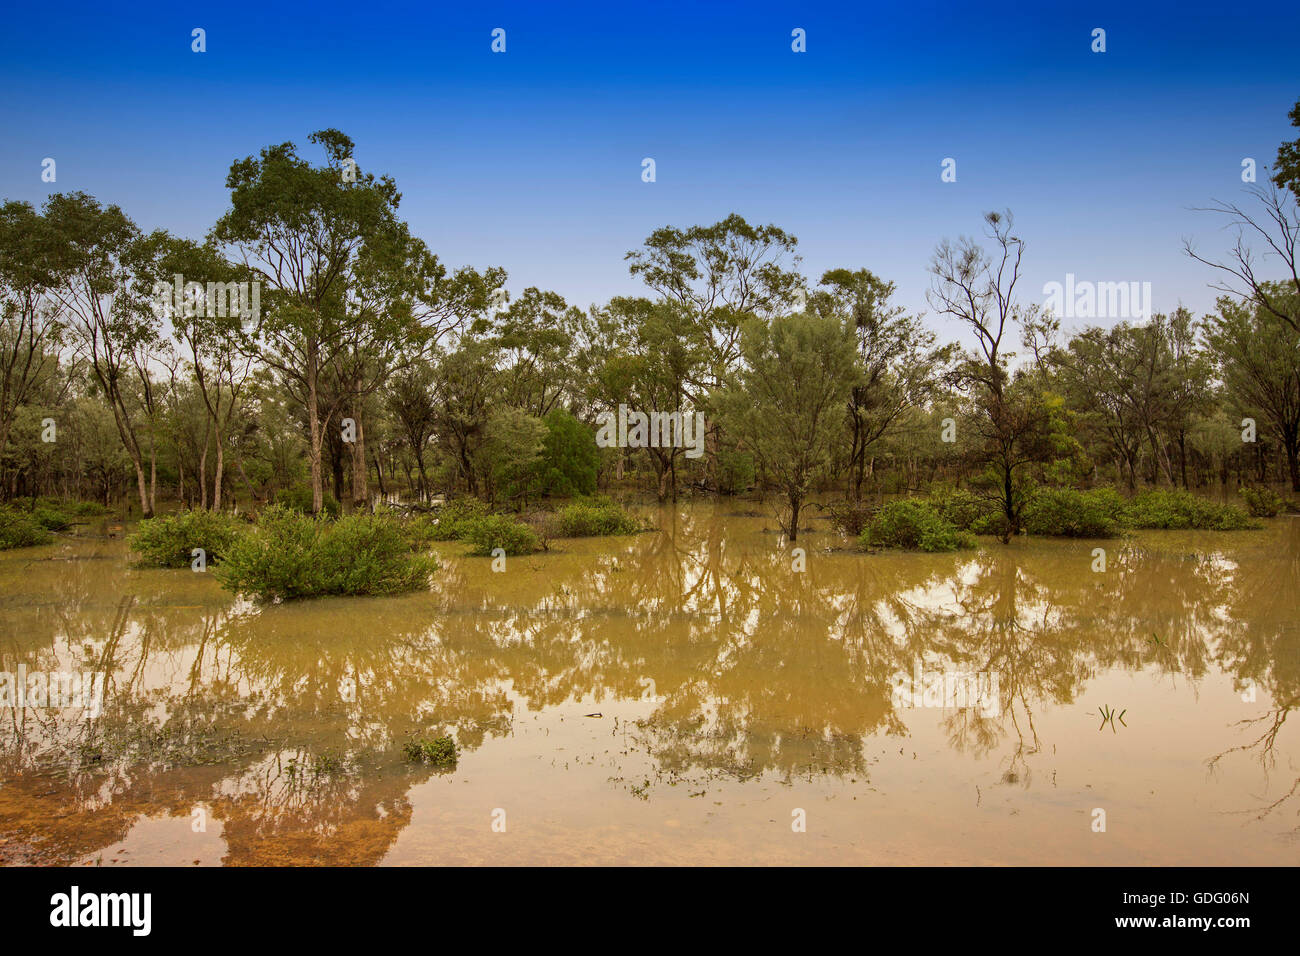 Australian outback landscape after rain, with low trees, shrubs, emerald grasses rising from & reflected in vast expanse of muddy water under blue sky Stock Photo